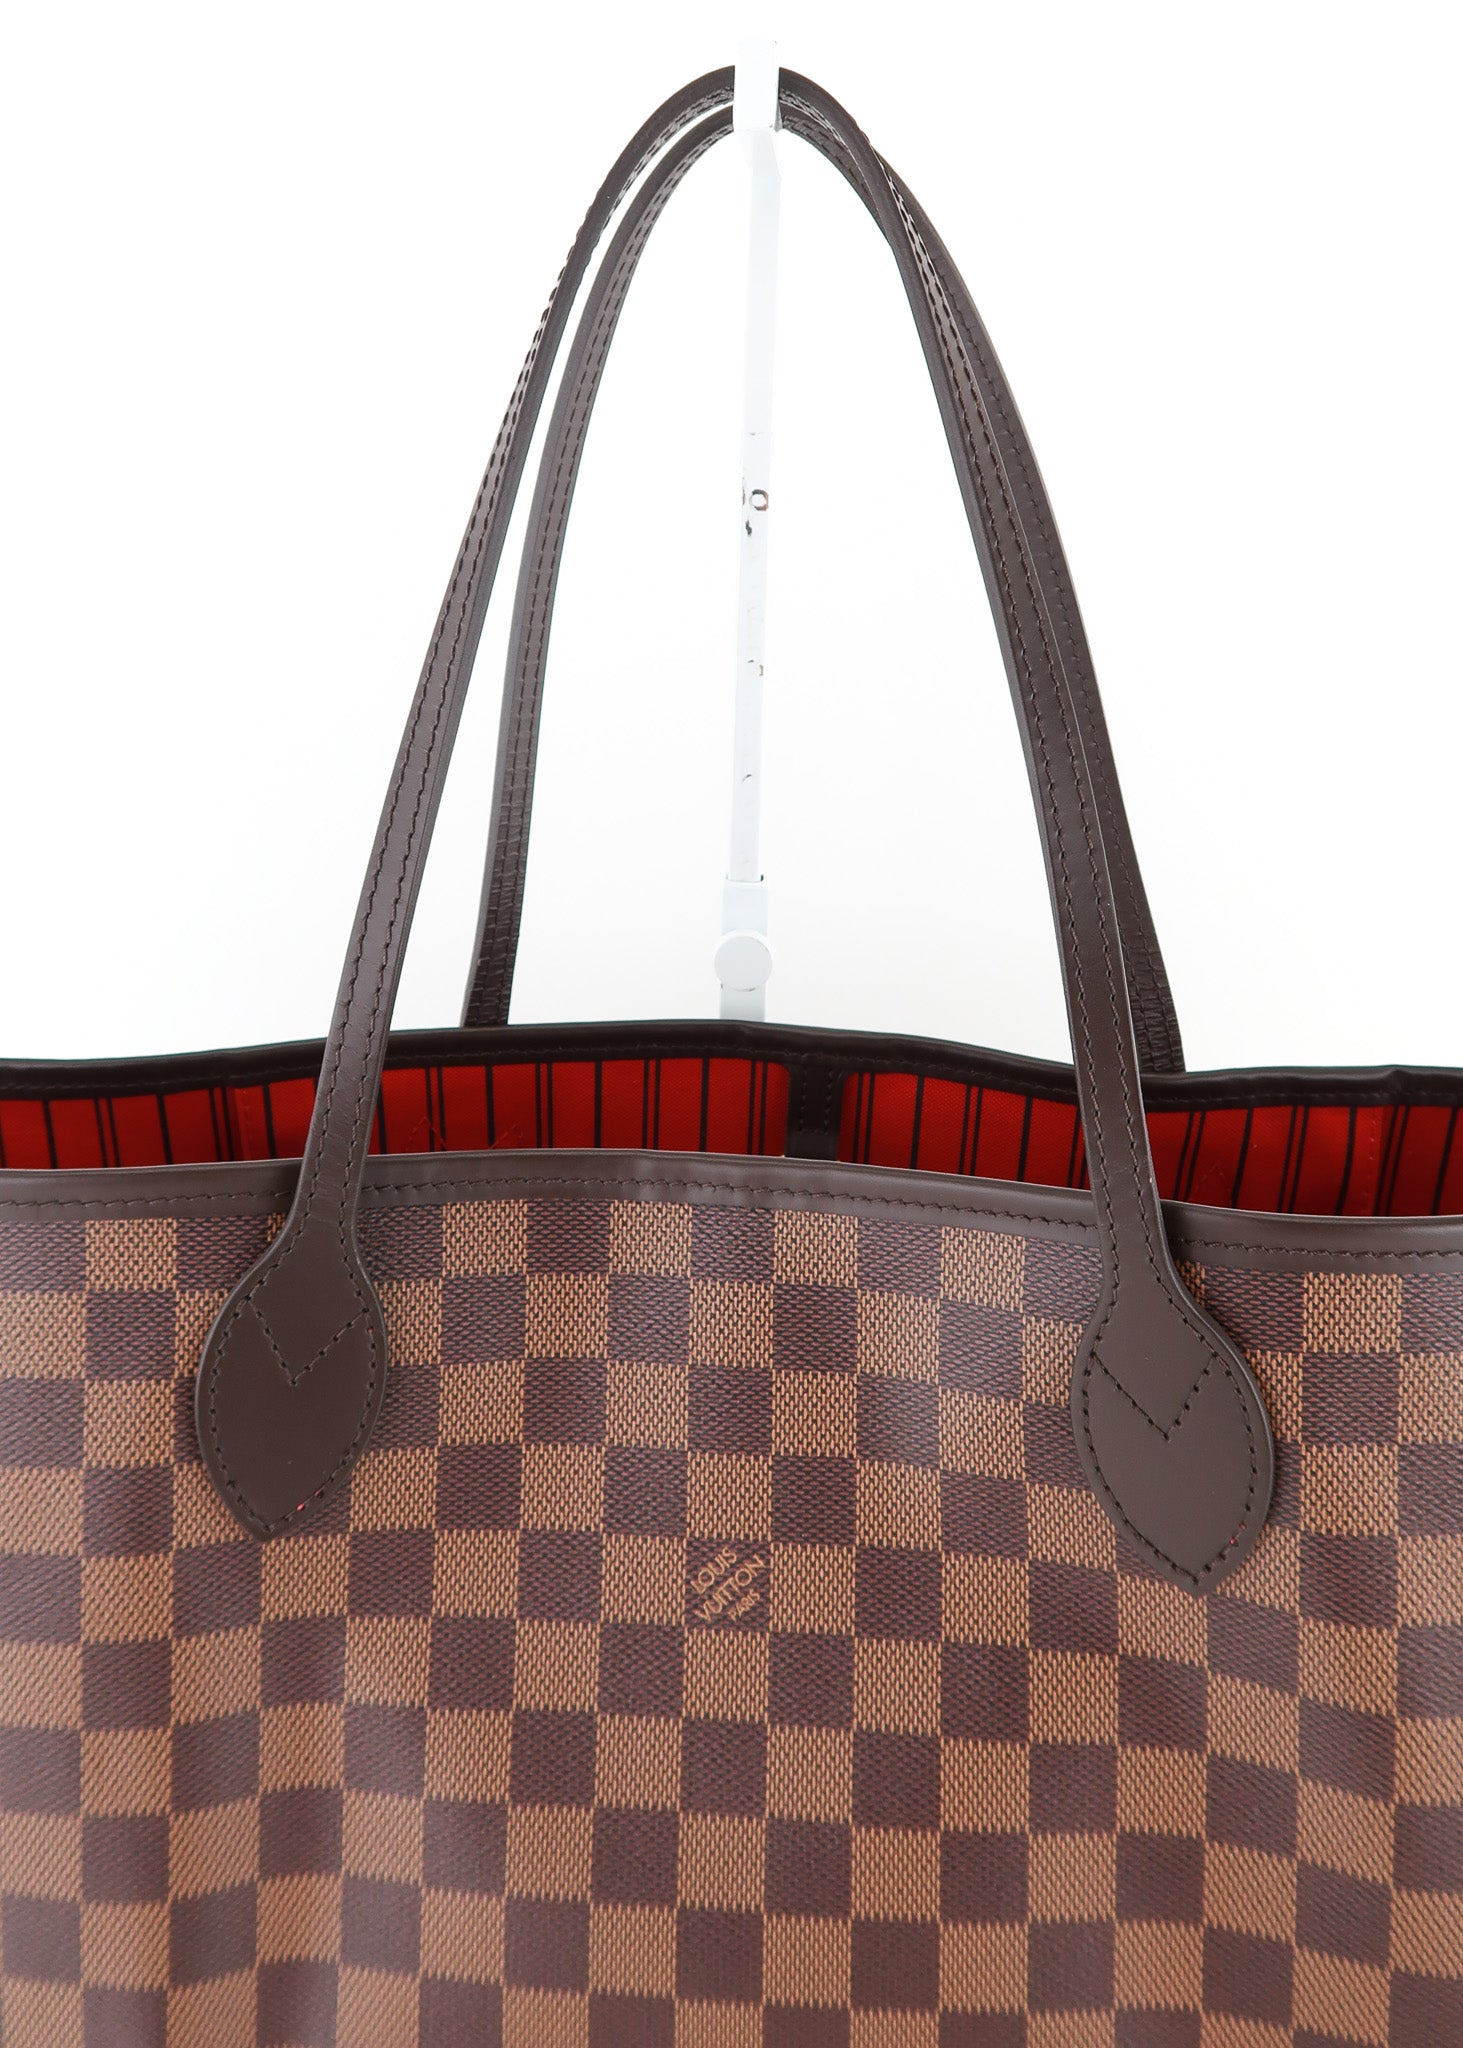 Louis Vuitton Neo Neverfull Damier Ebene (Without Pouch) PM Cerise Lining  in Canvas with Brass - US